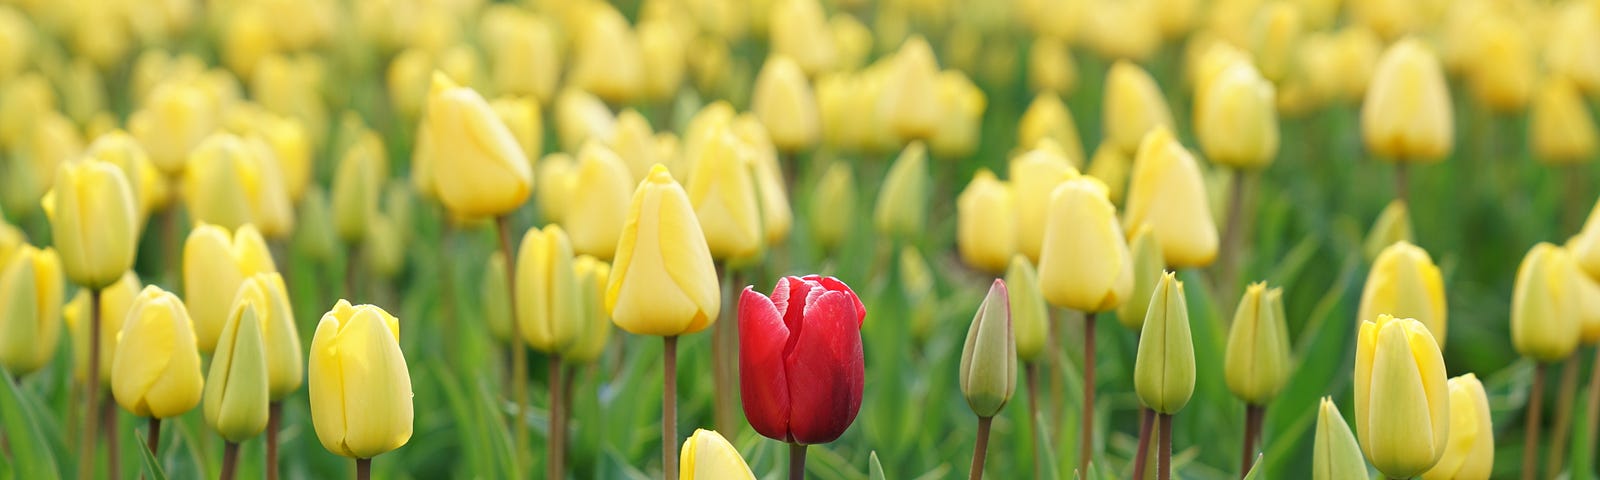 A single red tulip in a field of yellow tulips.